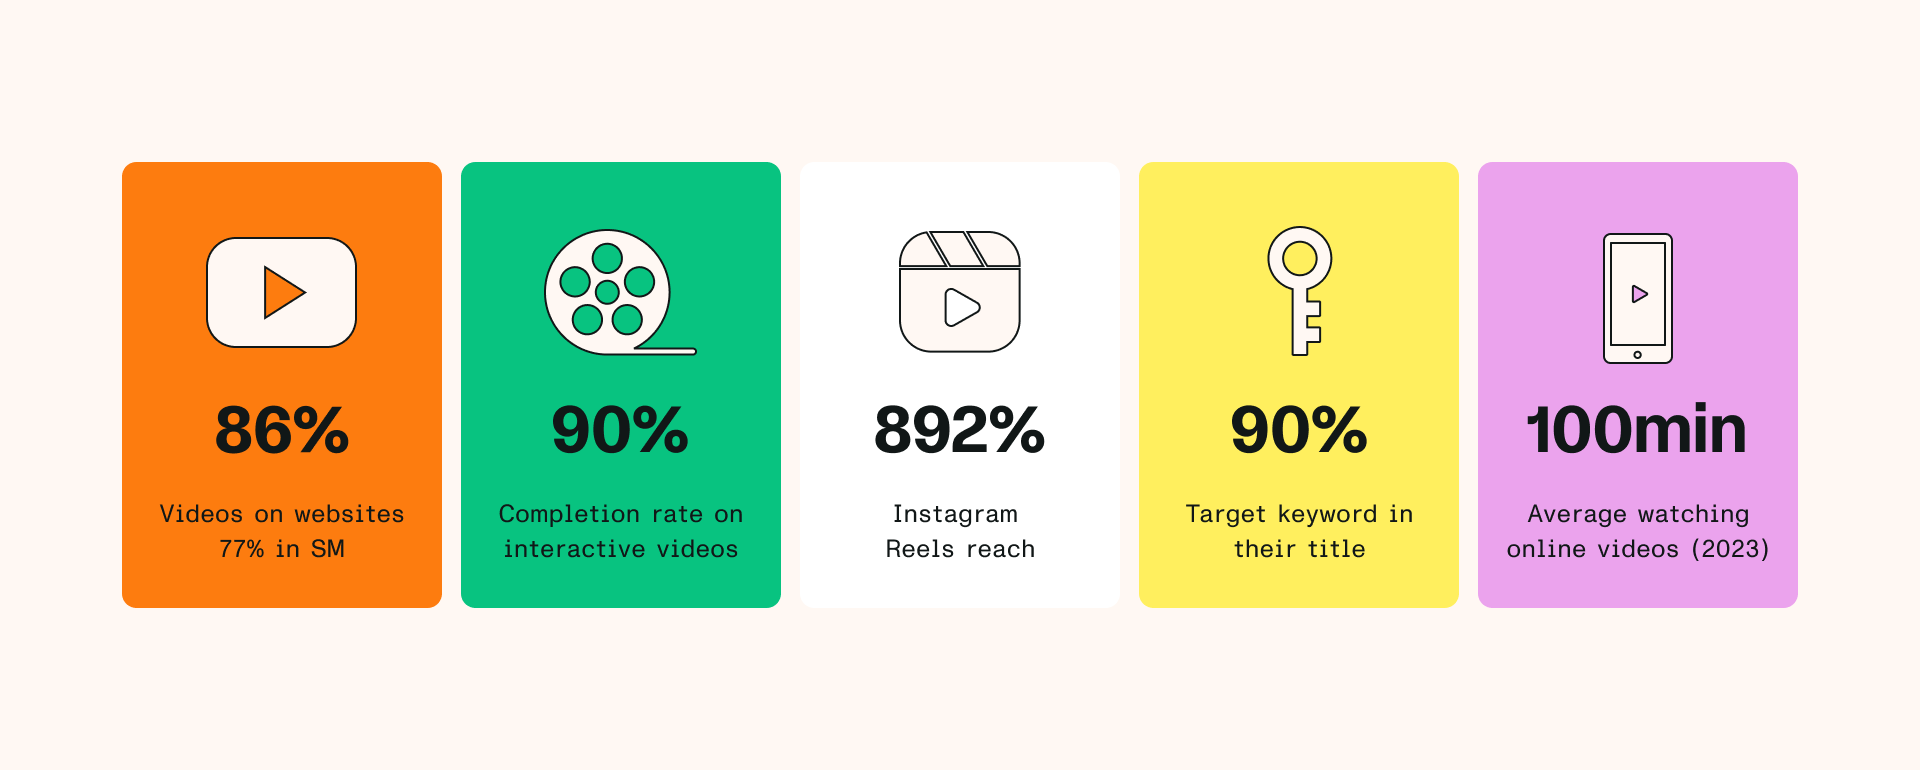 Infographic with video stats: website viewership and interactive video completion rates